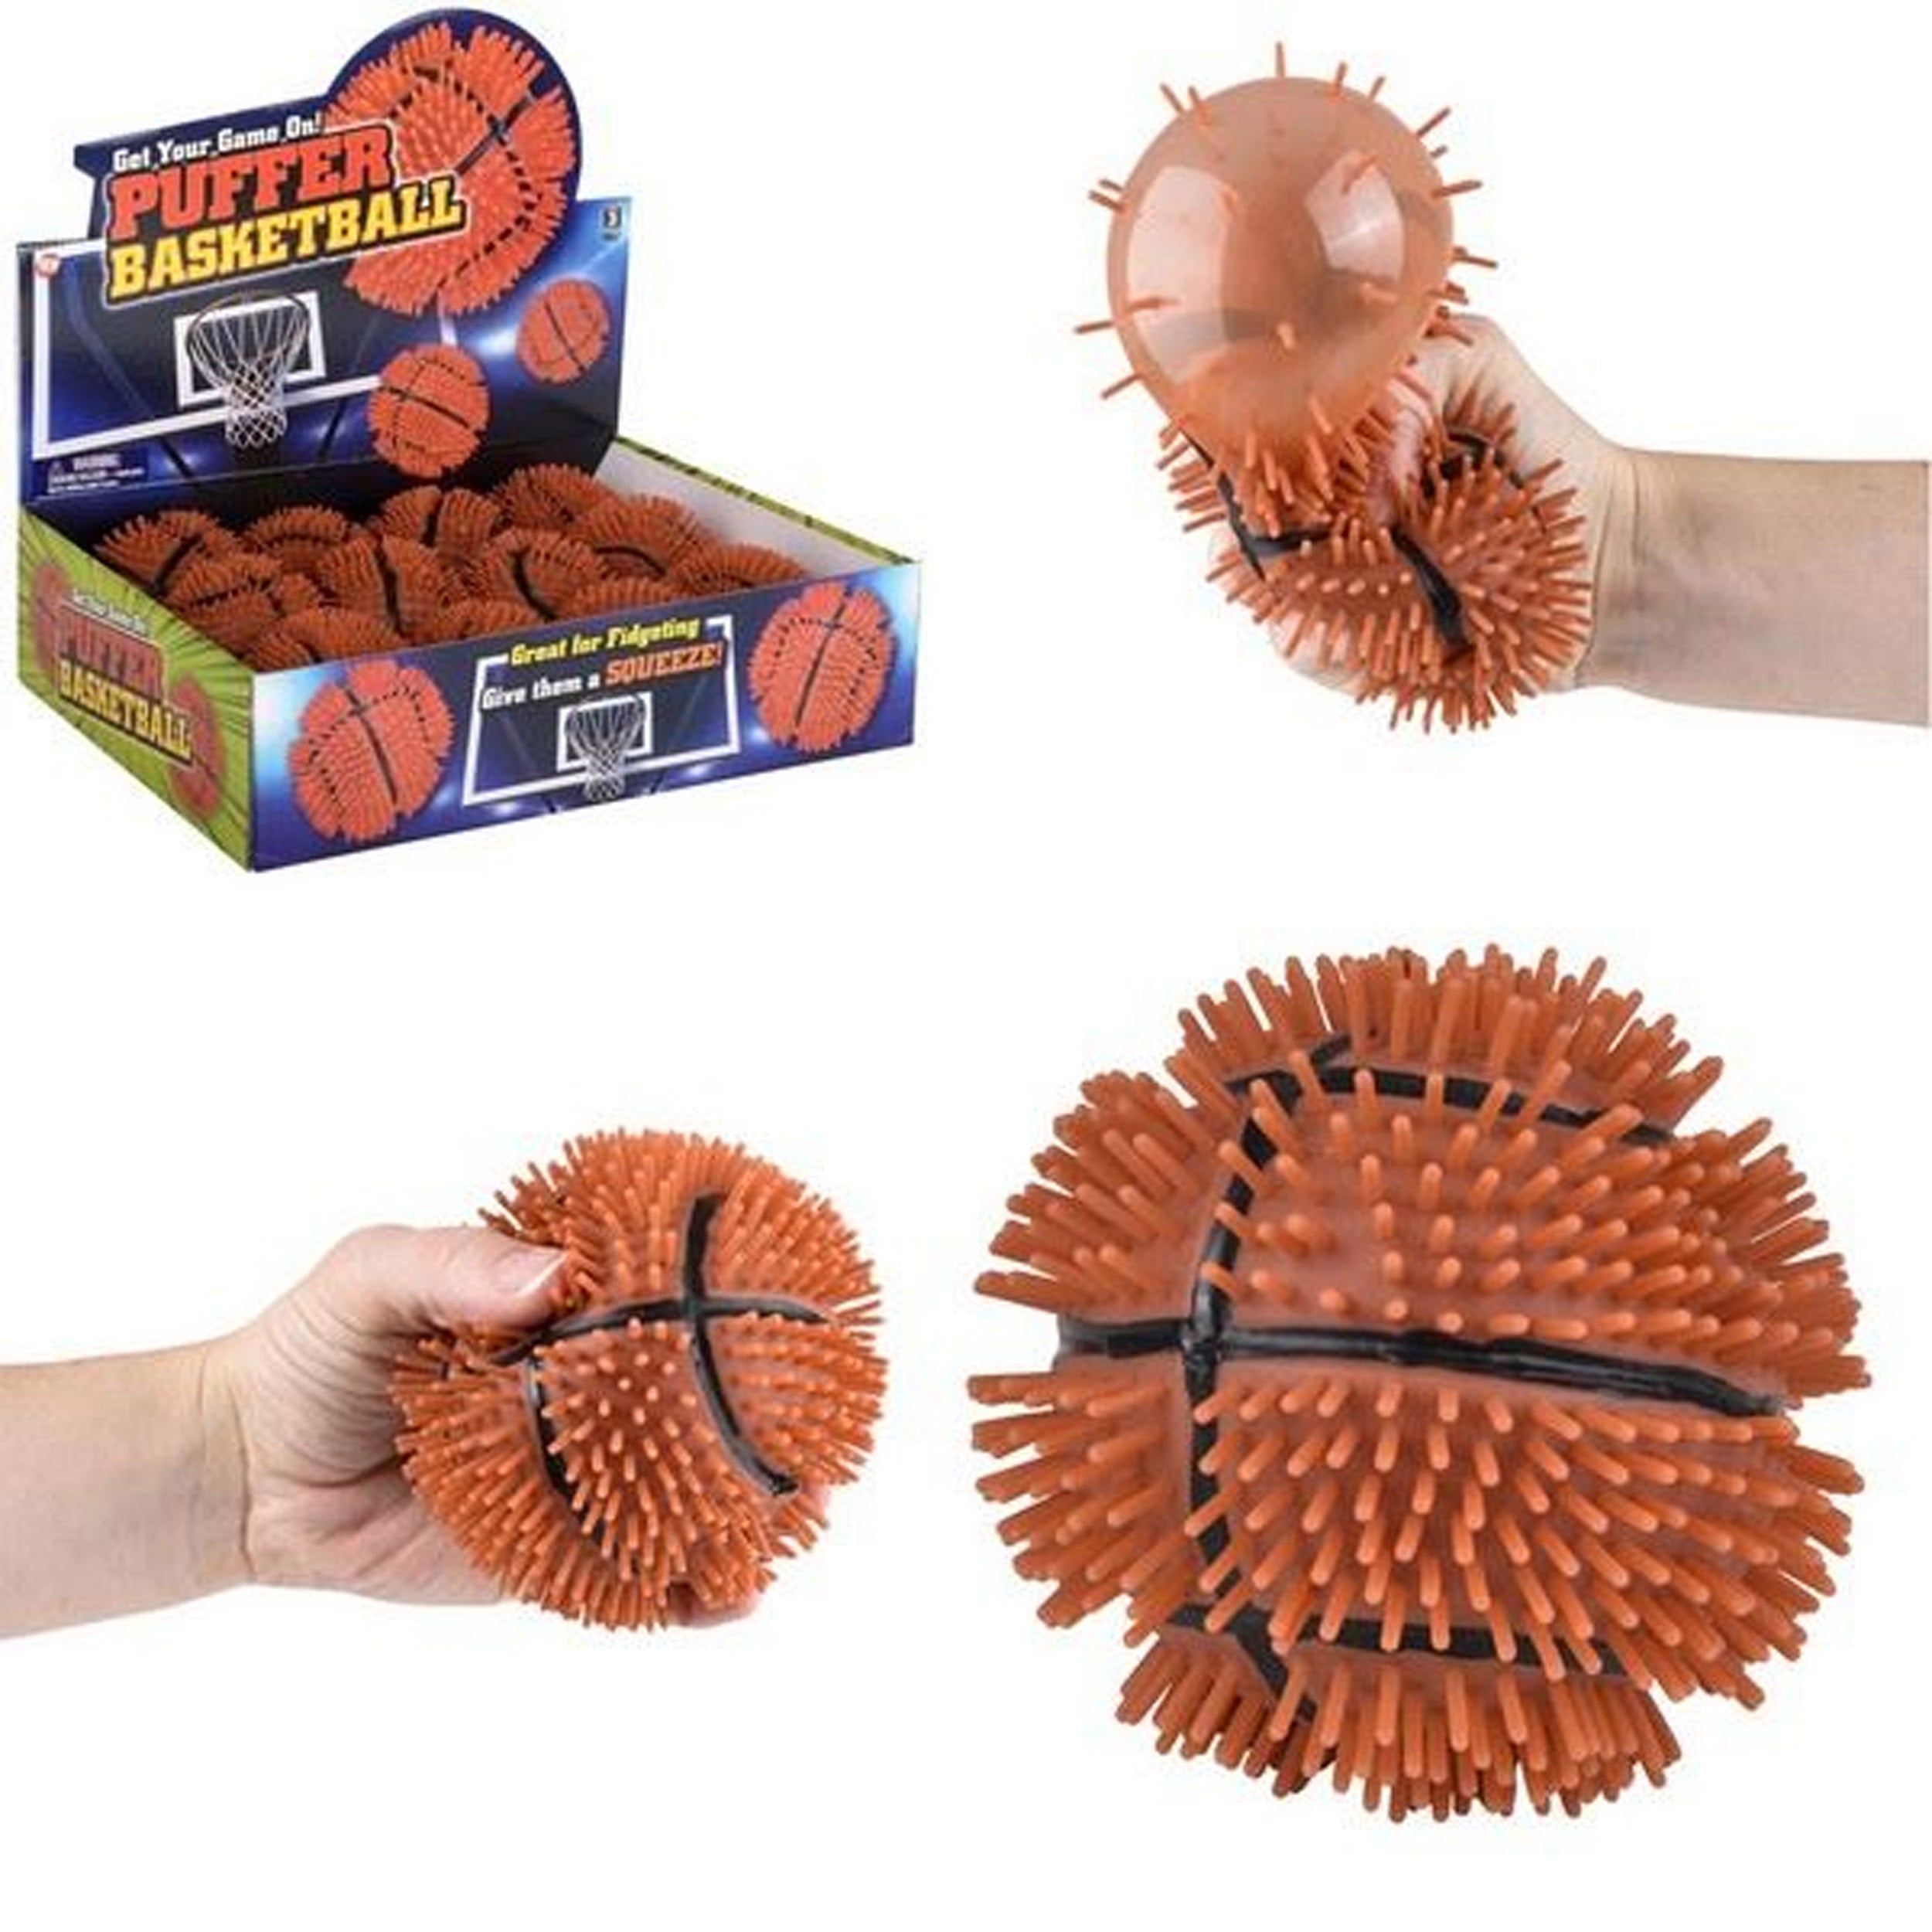 Bubble Squeeze Basketball Puffer Balls Air Filled Center Super Squeezable Texture Soft Rubbery Spikes